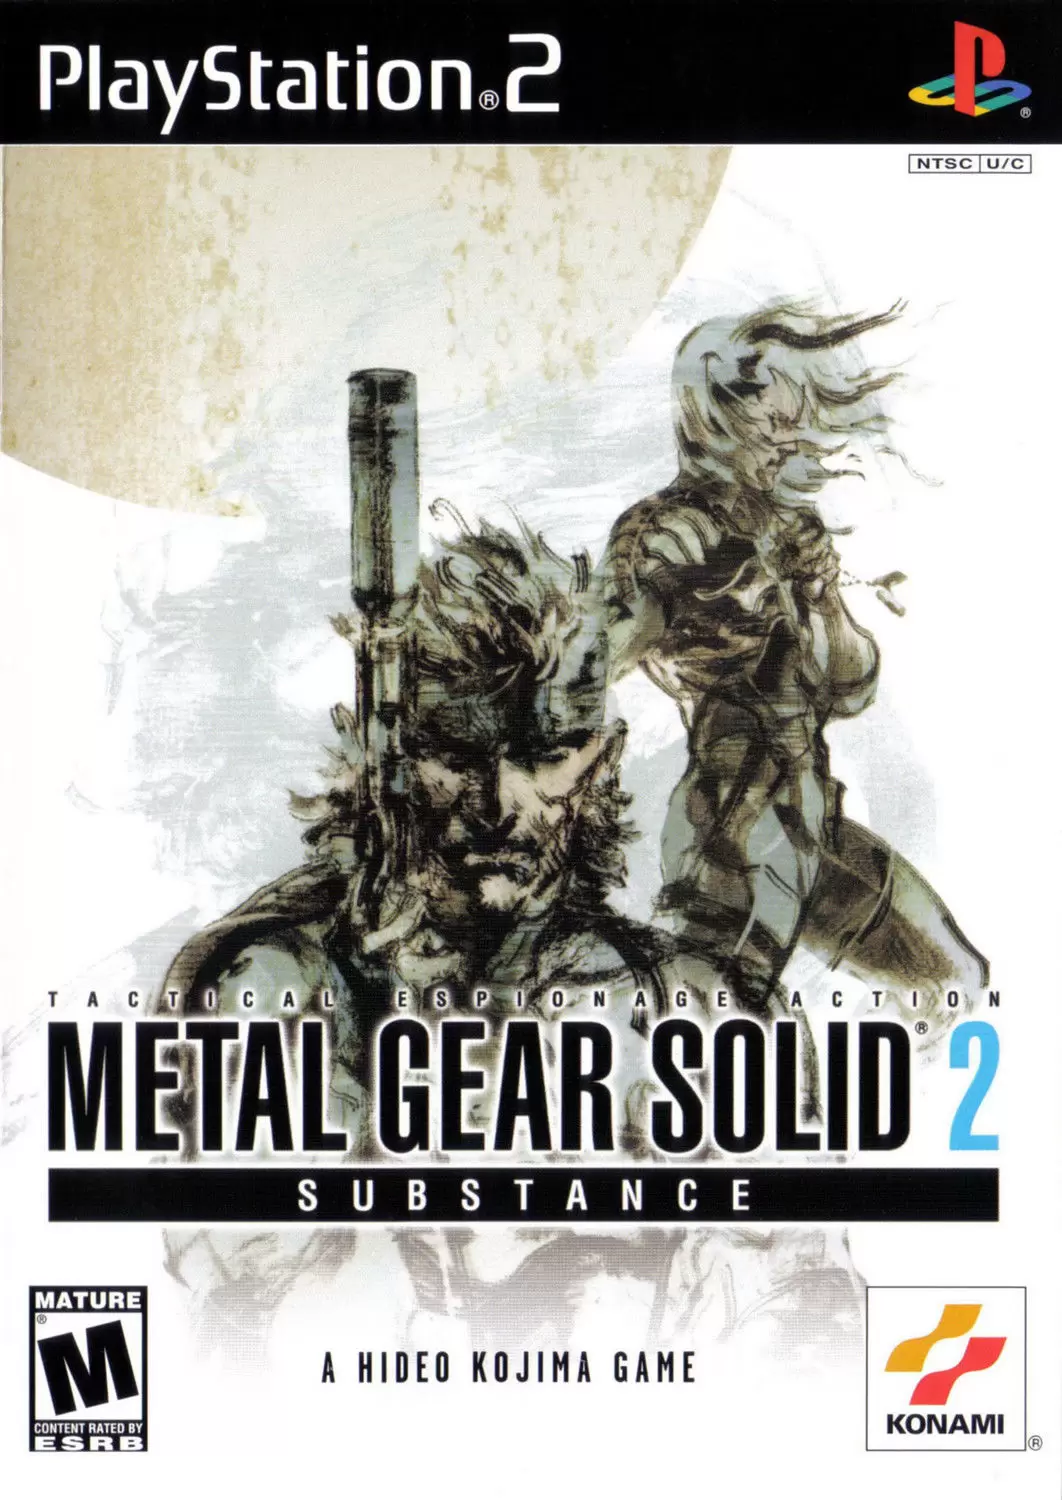 PS2 Games - Metal Gear Solid 2: Substance